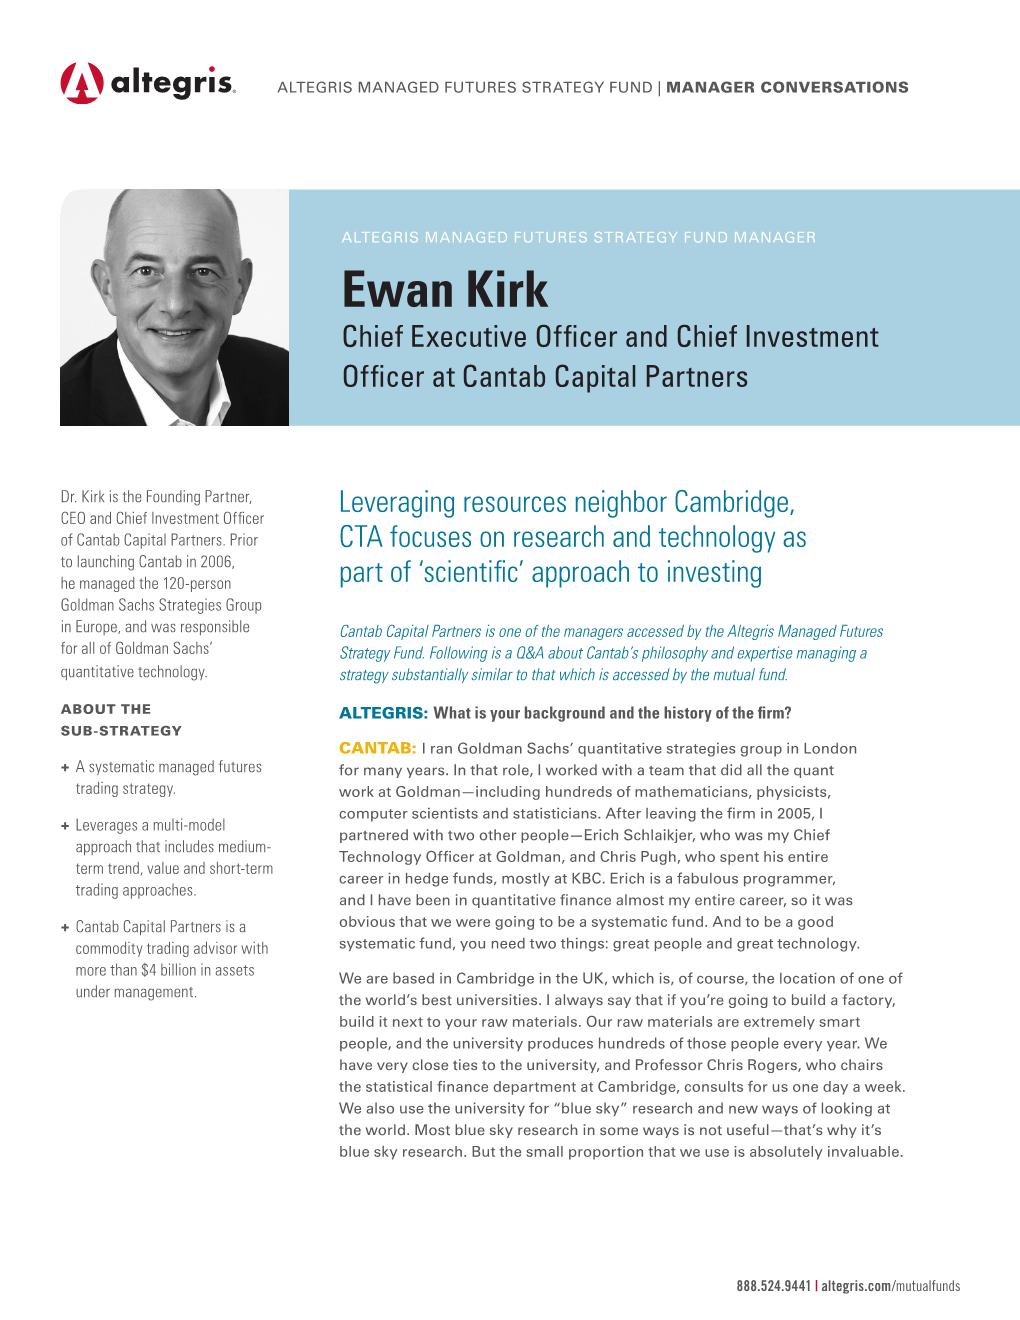 Ewan Kirk Chief Executive Officer and Chief Investment Officer at Cantab Capital Partners